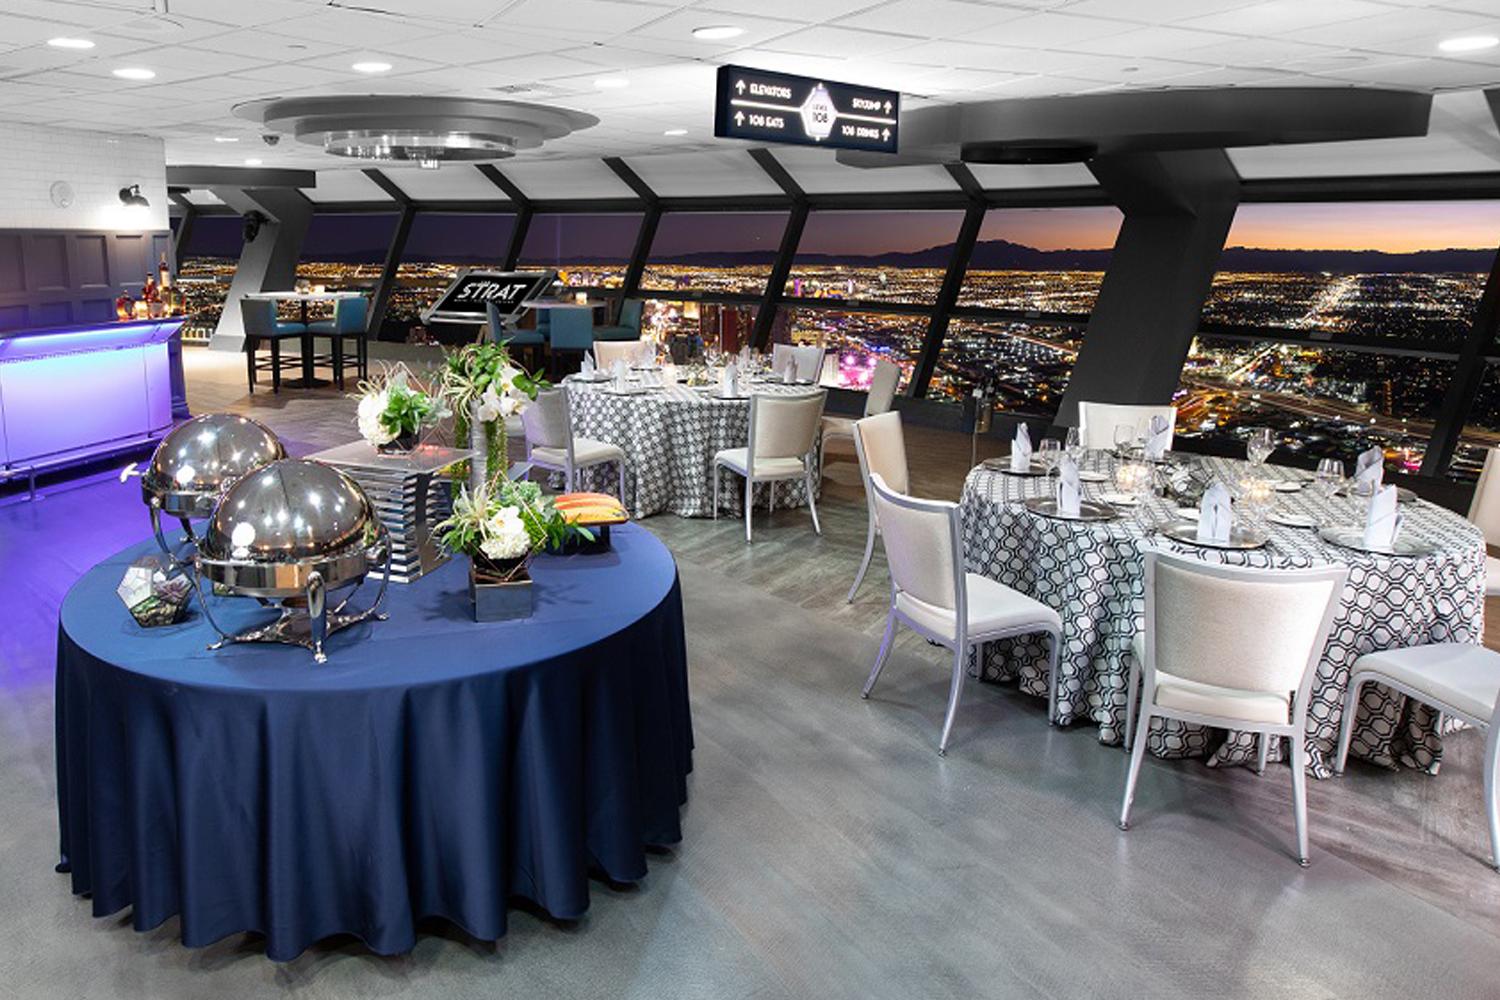 The STRAT SkyPod Level 108 tables set up with tablecloths with view of the Las Vegas Strip